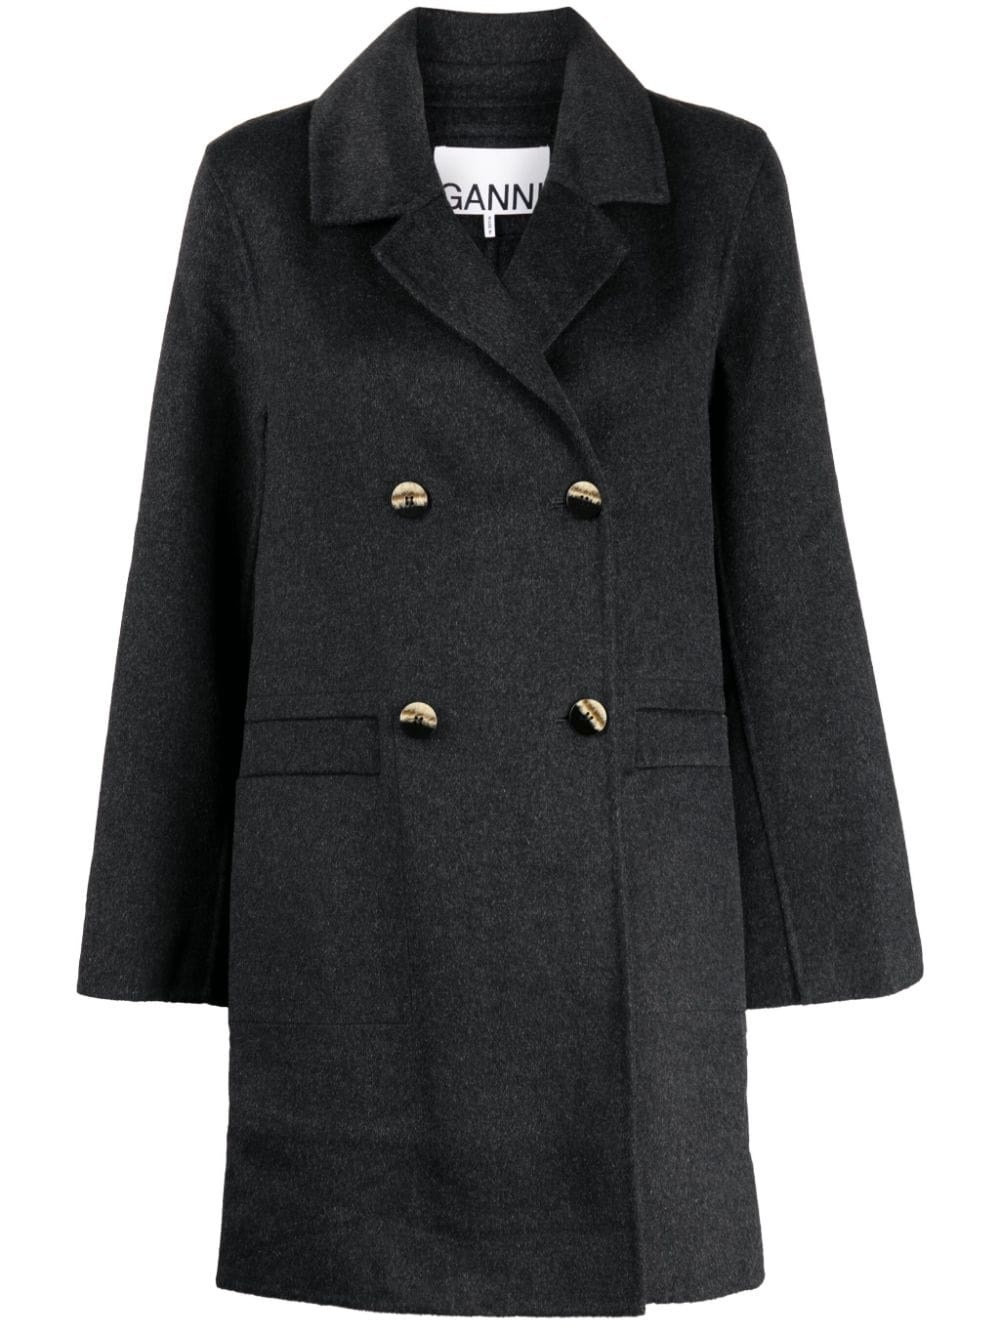 GANNI DOUBLE-BREASTED COAT